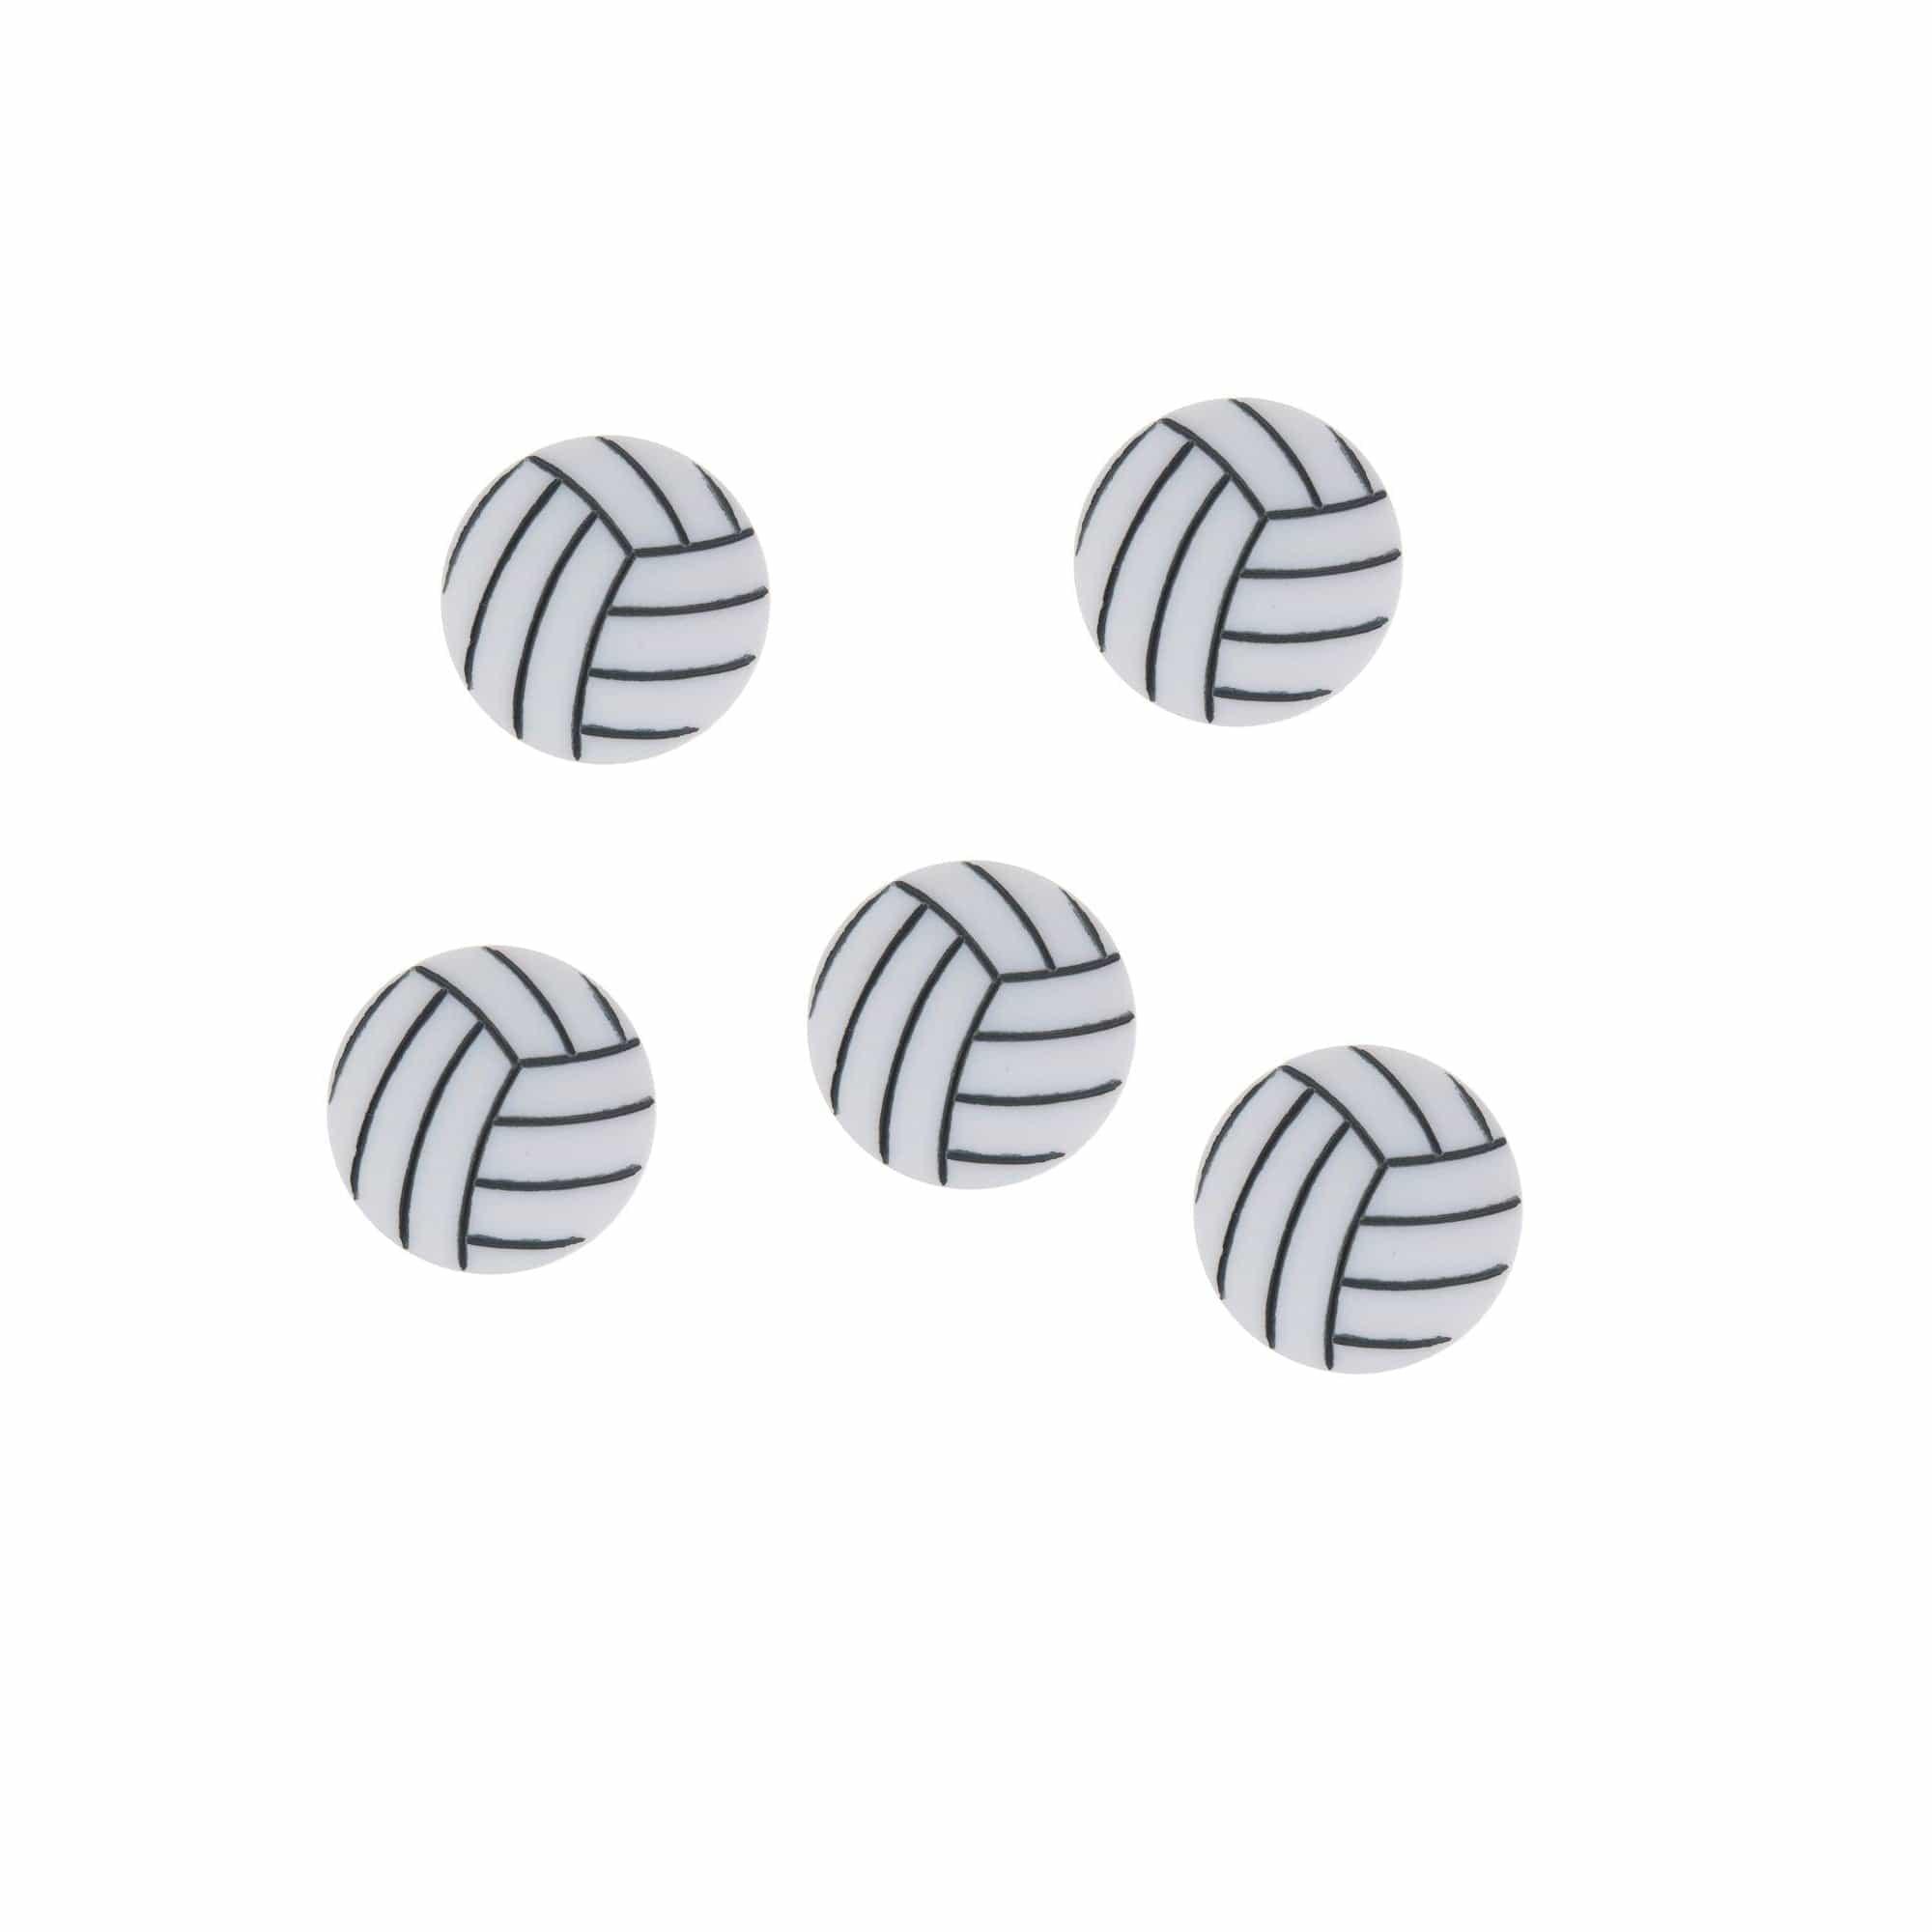 Volleyball Fun Collection Volleyball Scrapbook Buttons by SSC Designs - Pkg. of 5 - Scrapbook Supply Companies